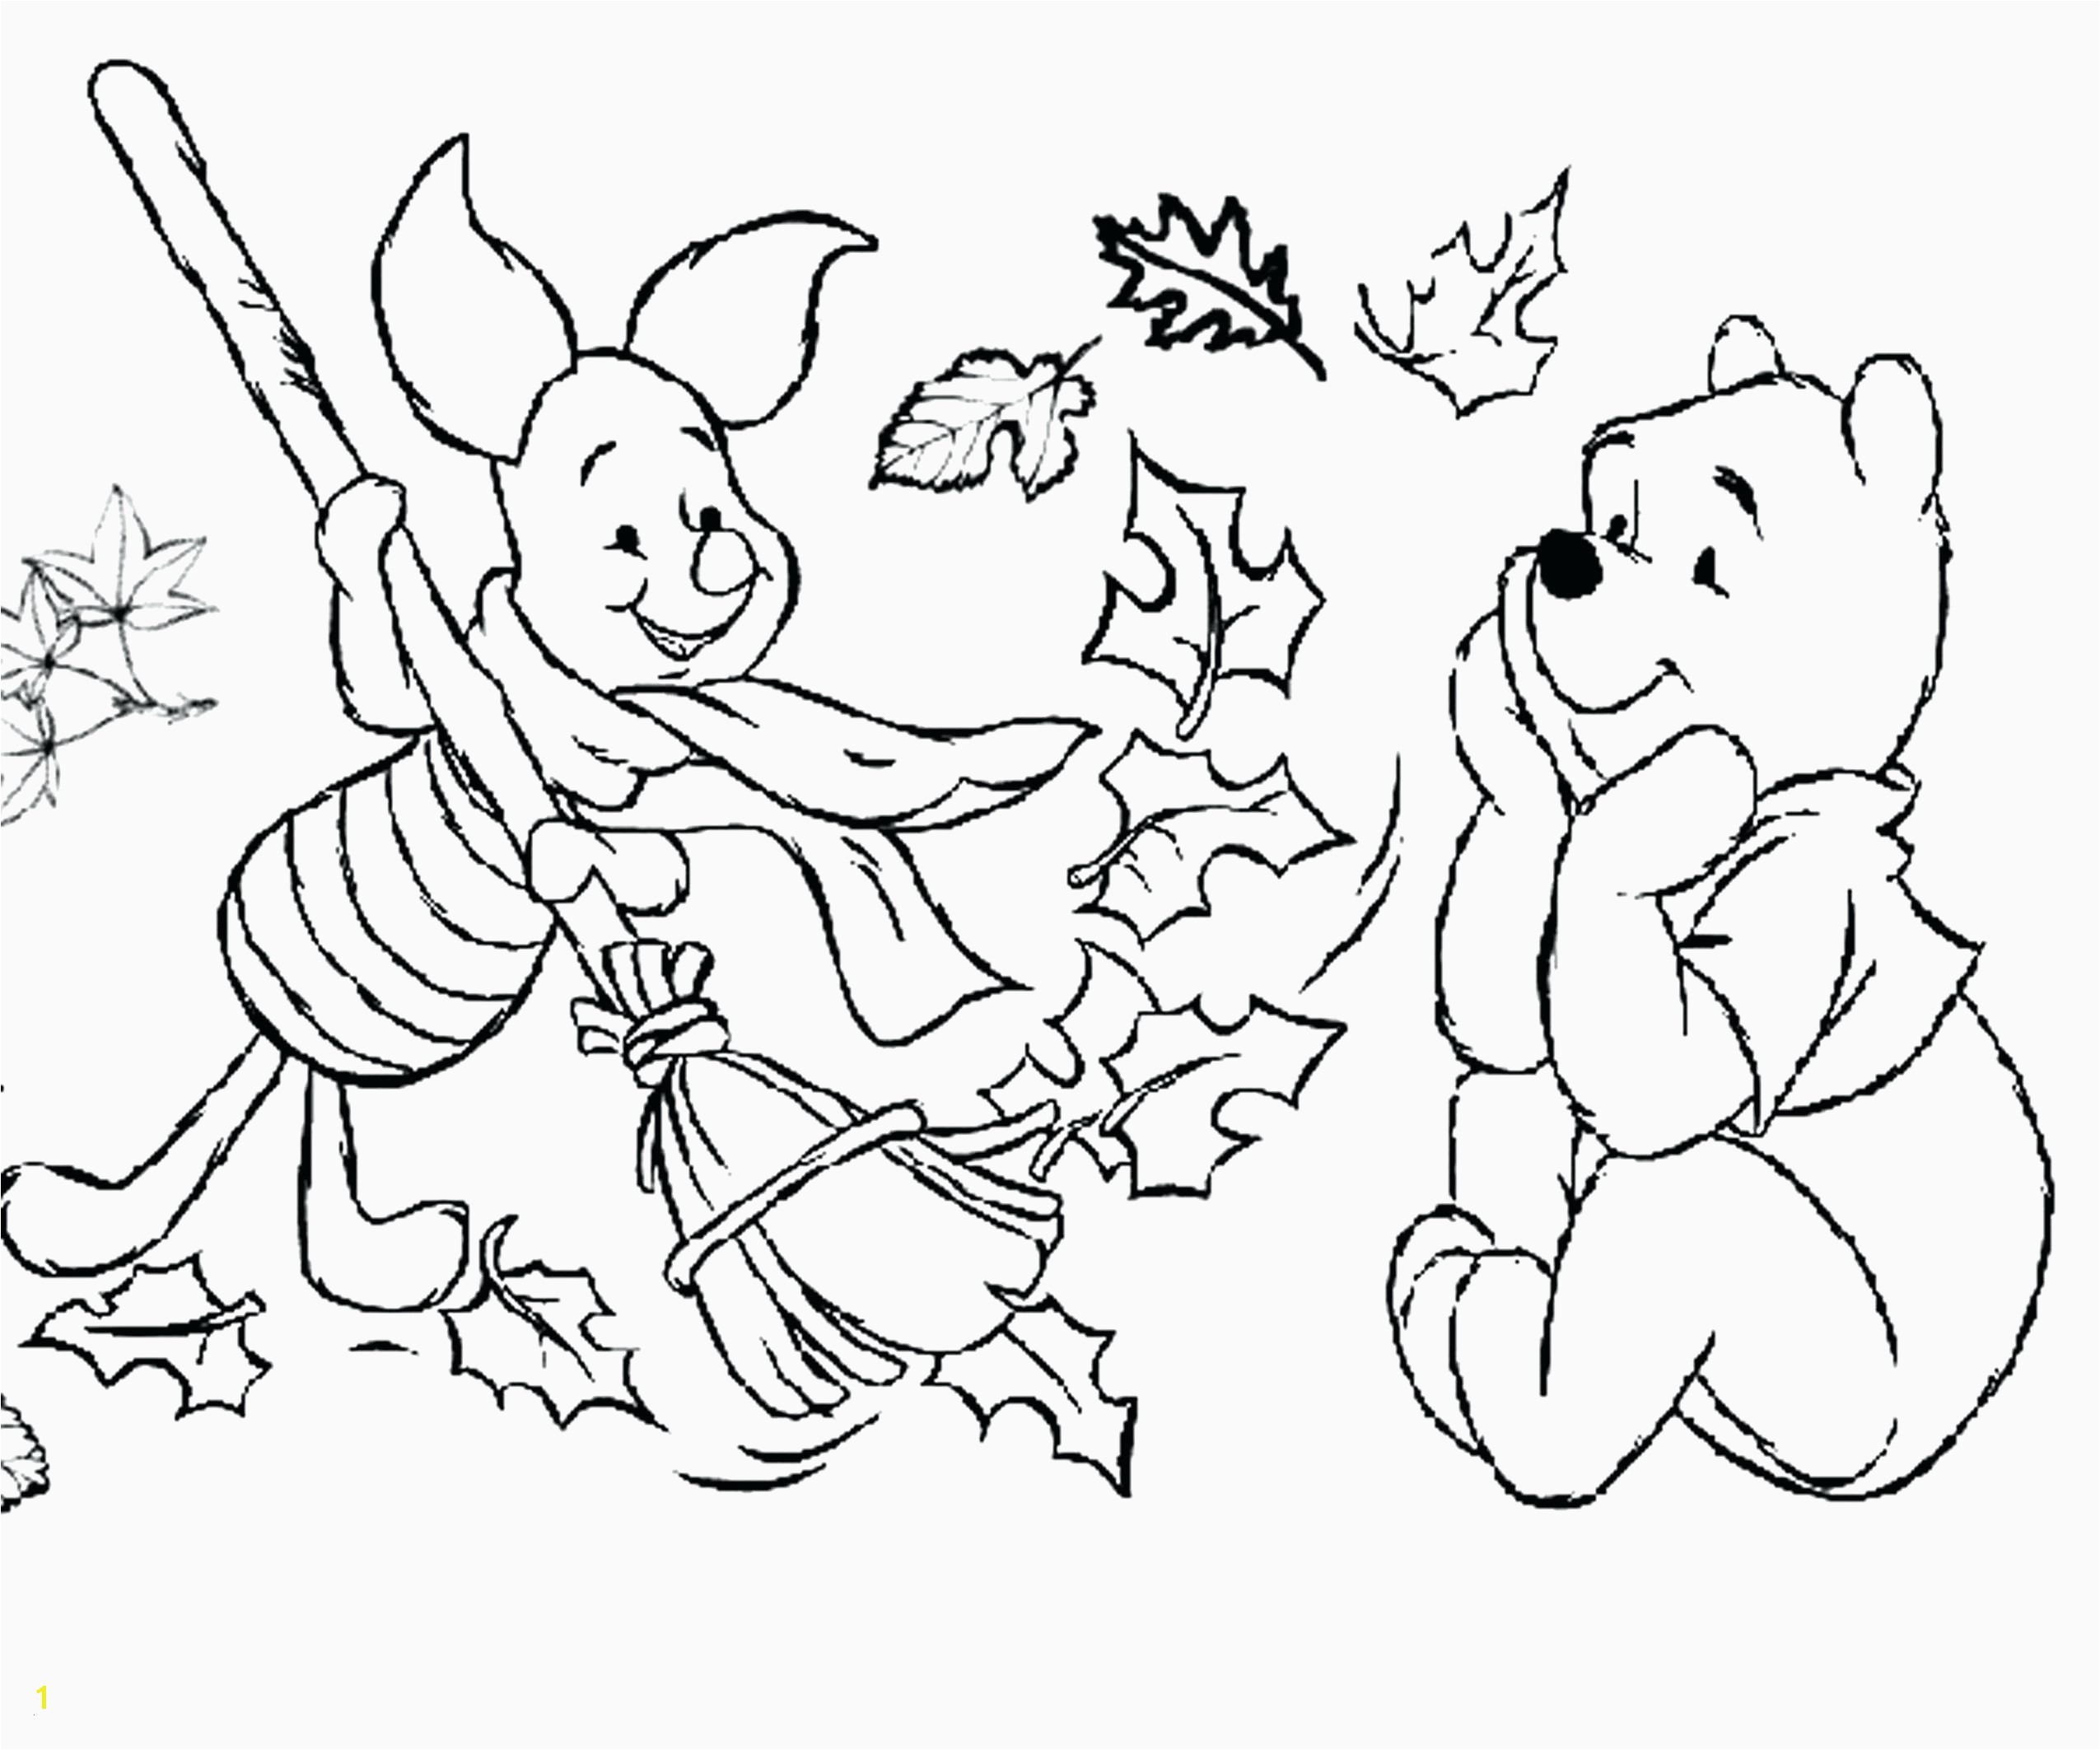 Leotard Coloring Pages Leotard Coloring Pages Coloring Pages for Children Great Preschool